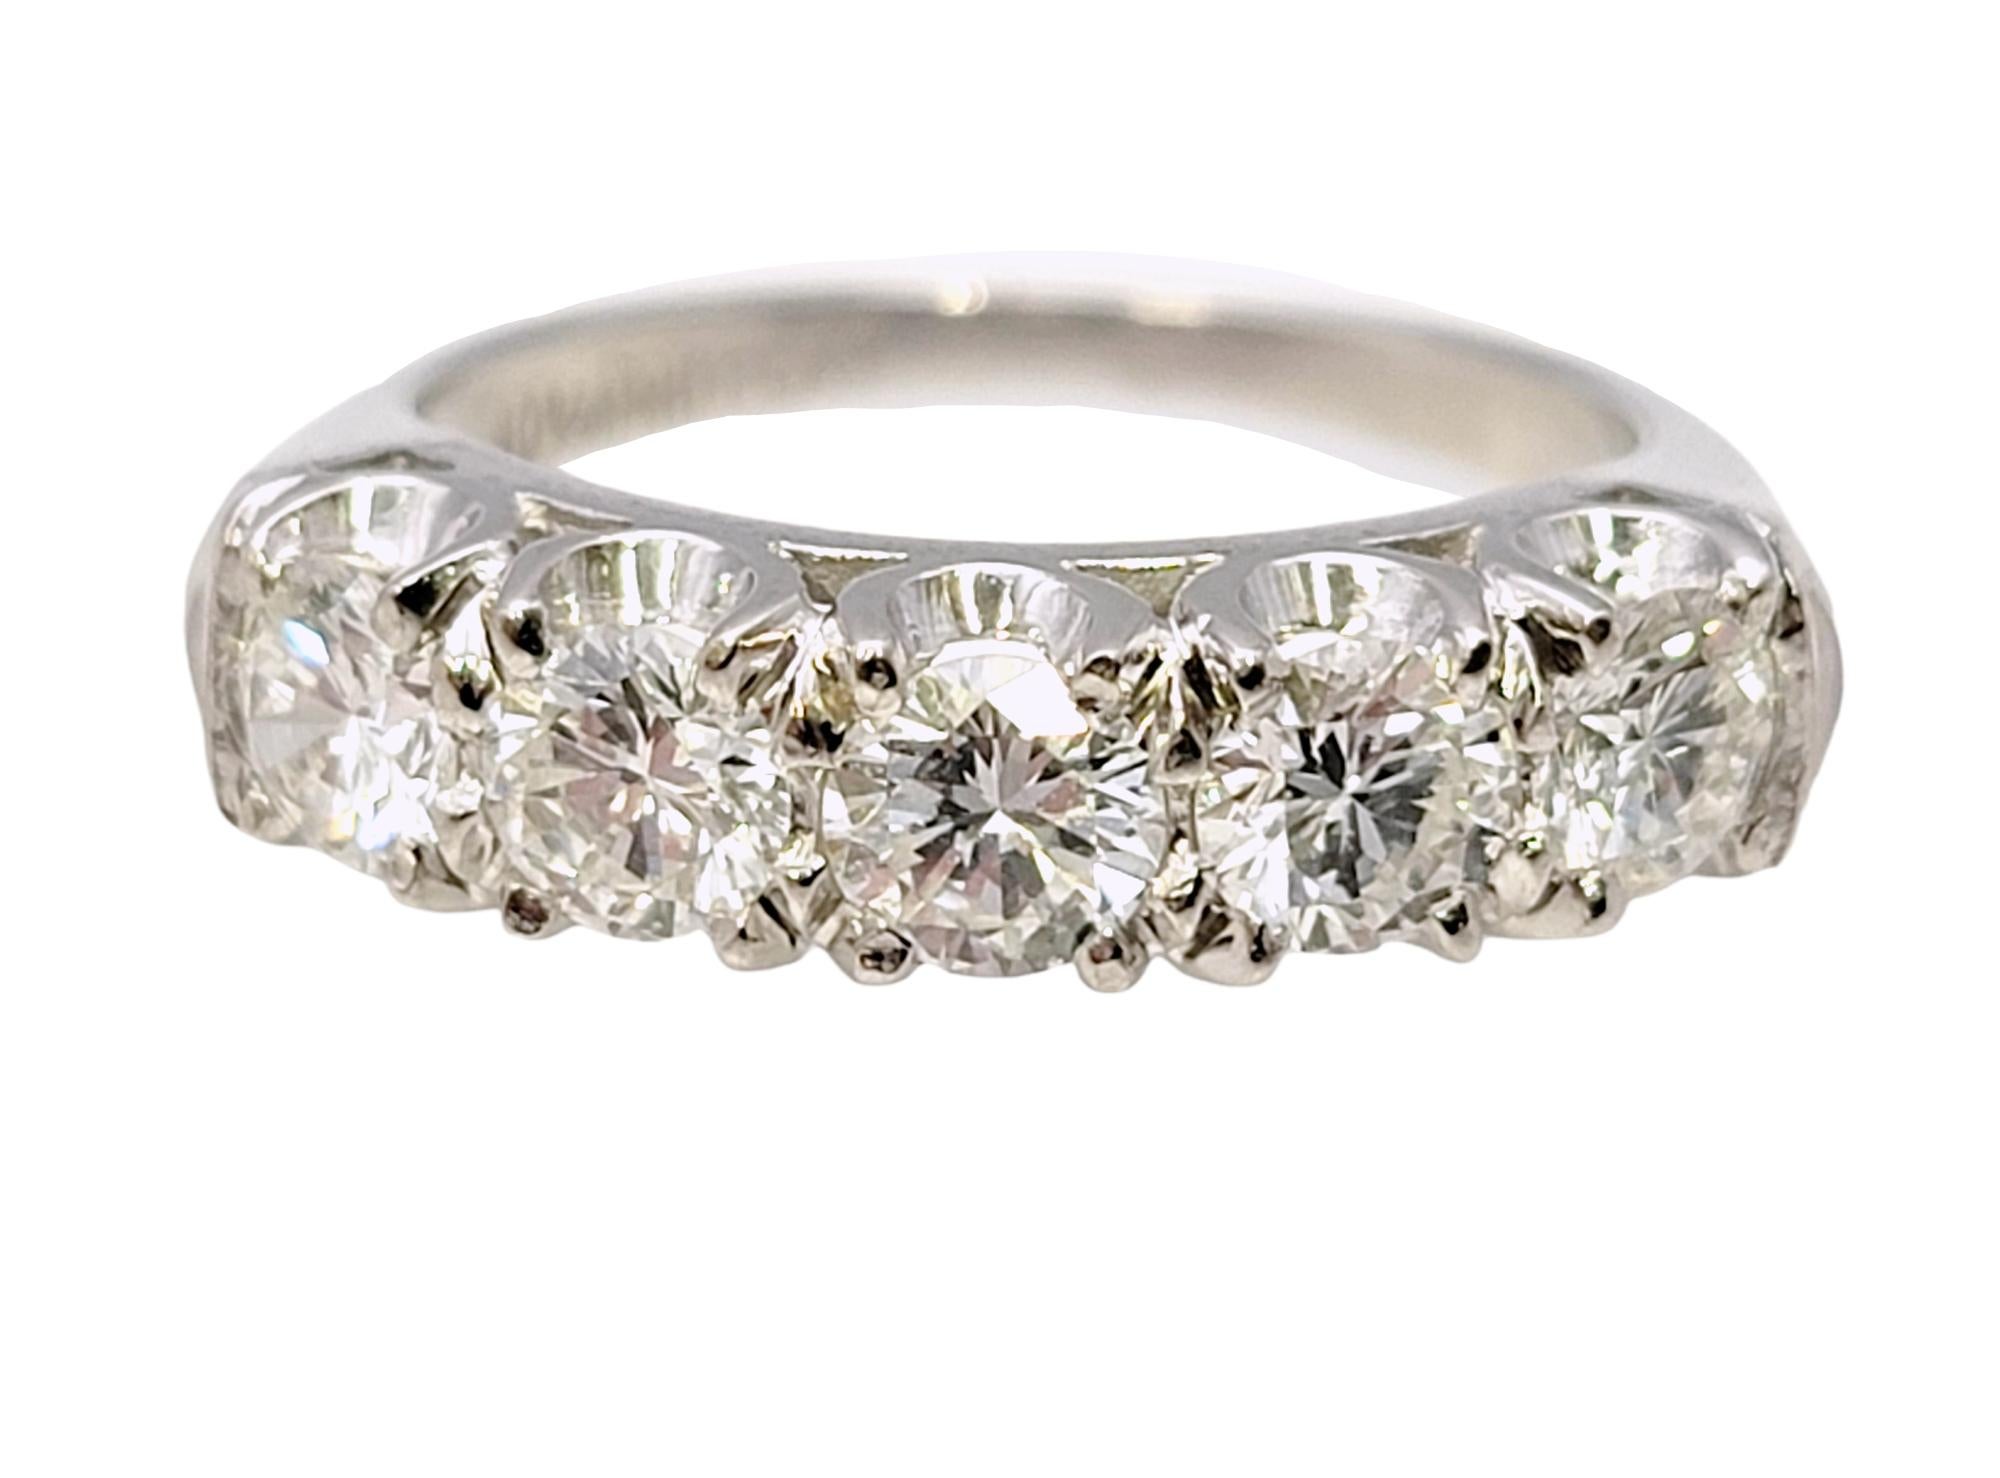 Ring size: 5.75

This gorgeous platinum and diamond band ring is a striking piece of jewelry. Along the ring, five exquisite stones are elegantly set, creating an impressive luxurious sparkle. This ring effortlessly combines modern style with